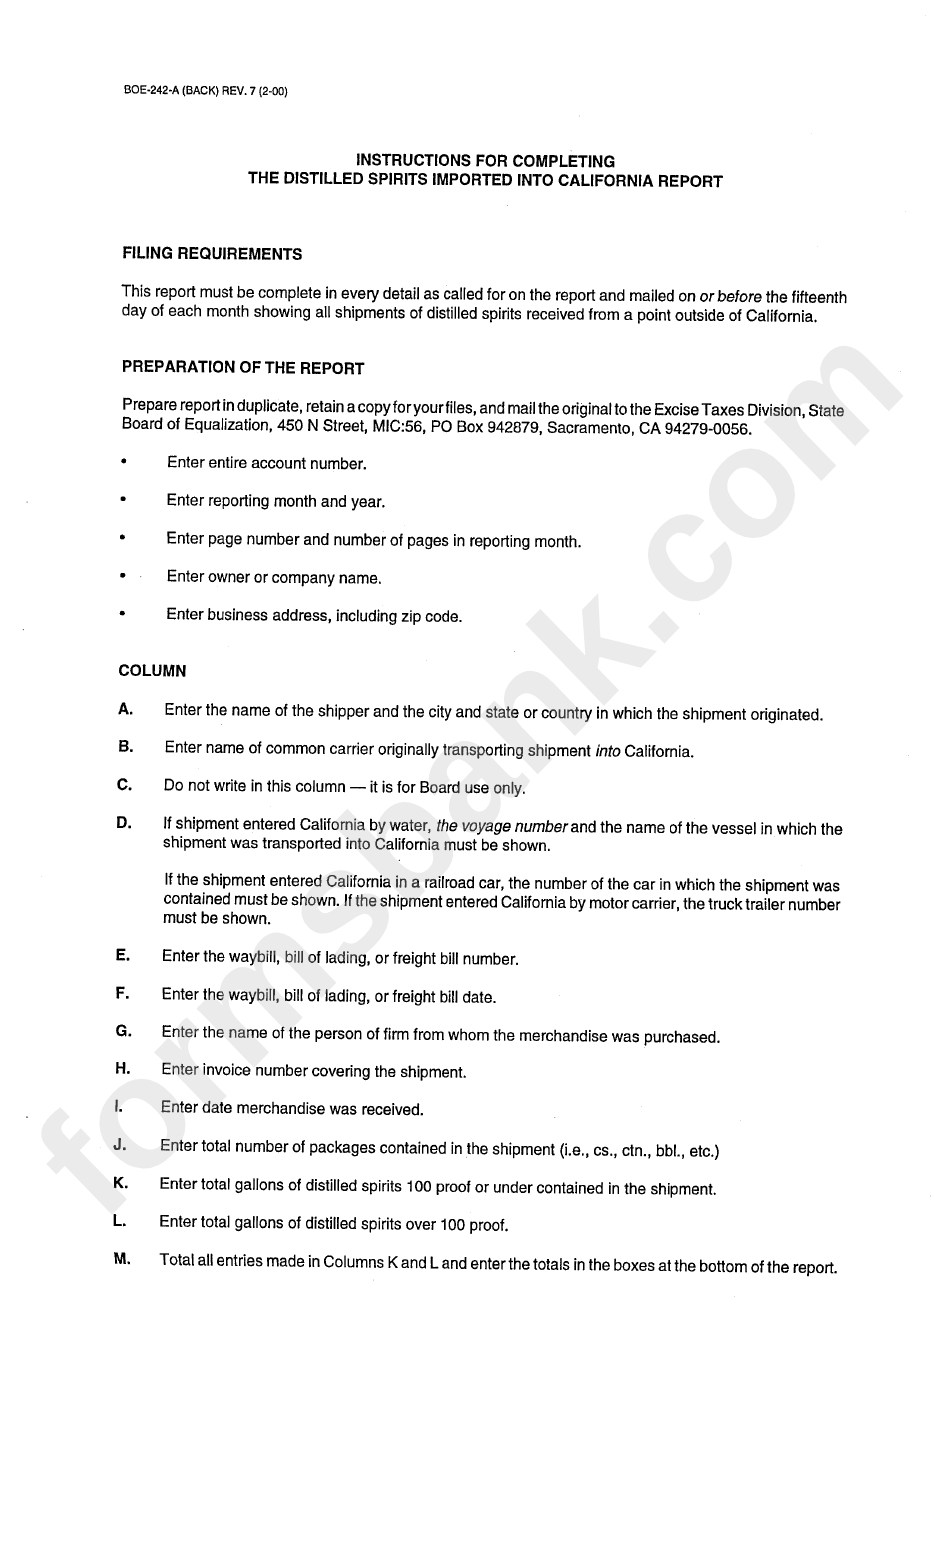 Form Boe-242-A Instructions - Completing The Distilled Spirits Imported Into California Report